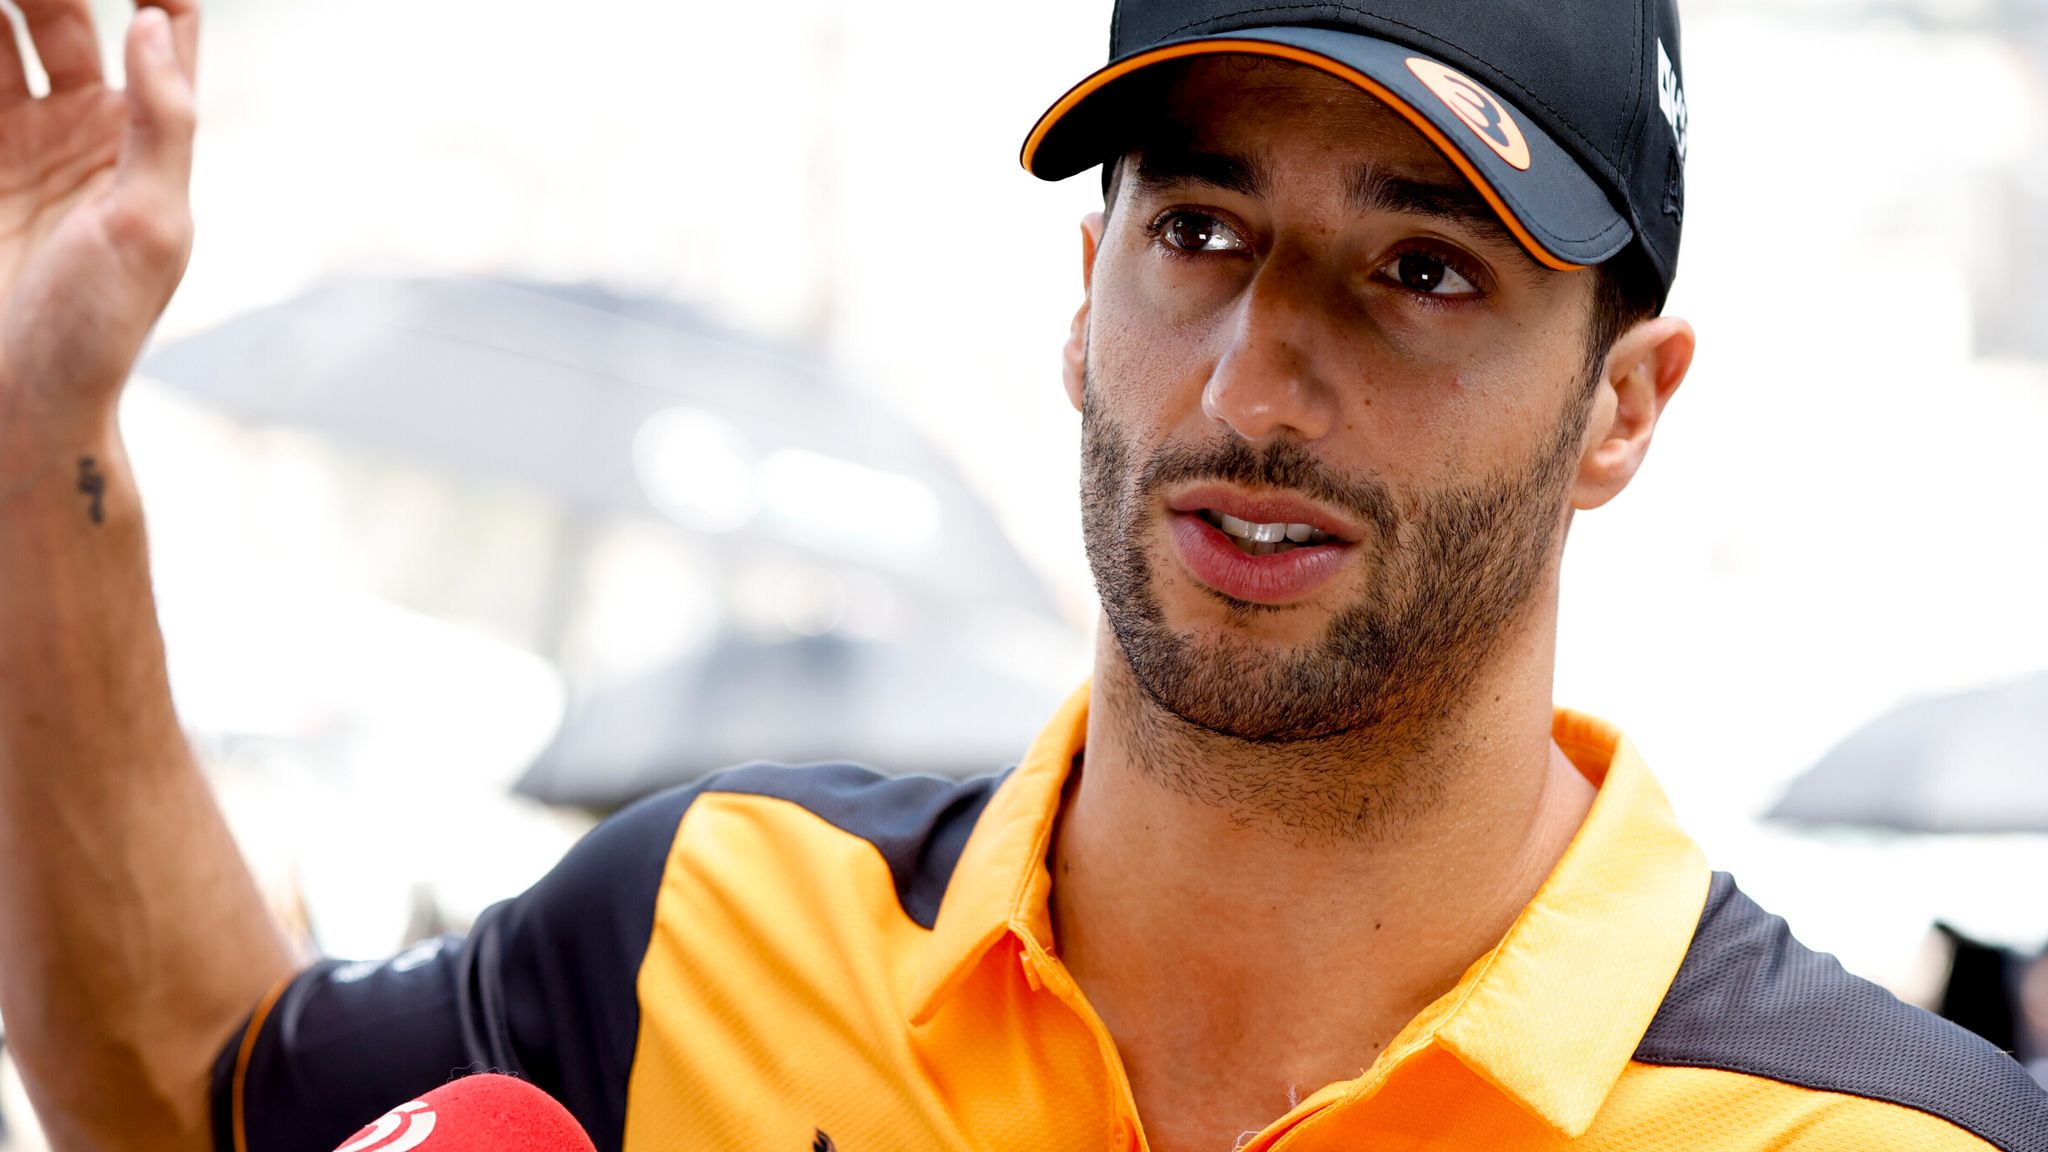 Ricciardo continues his contract extension while his career is unclear